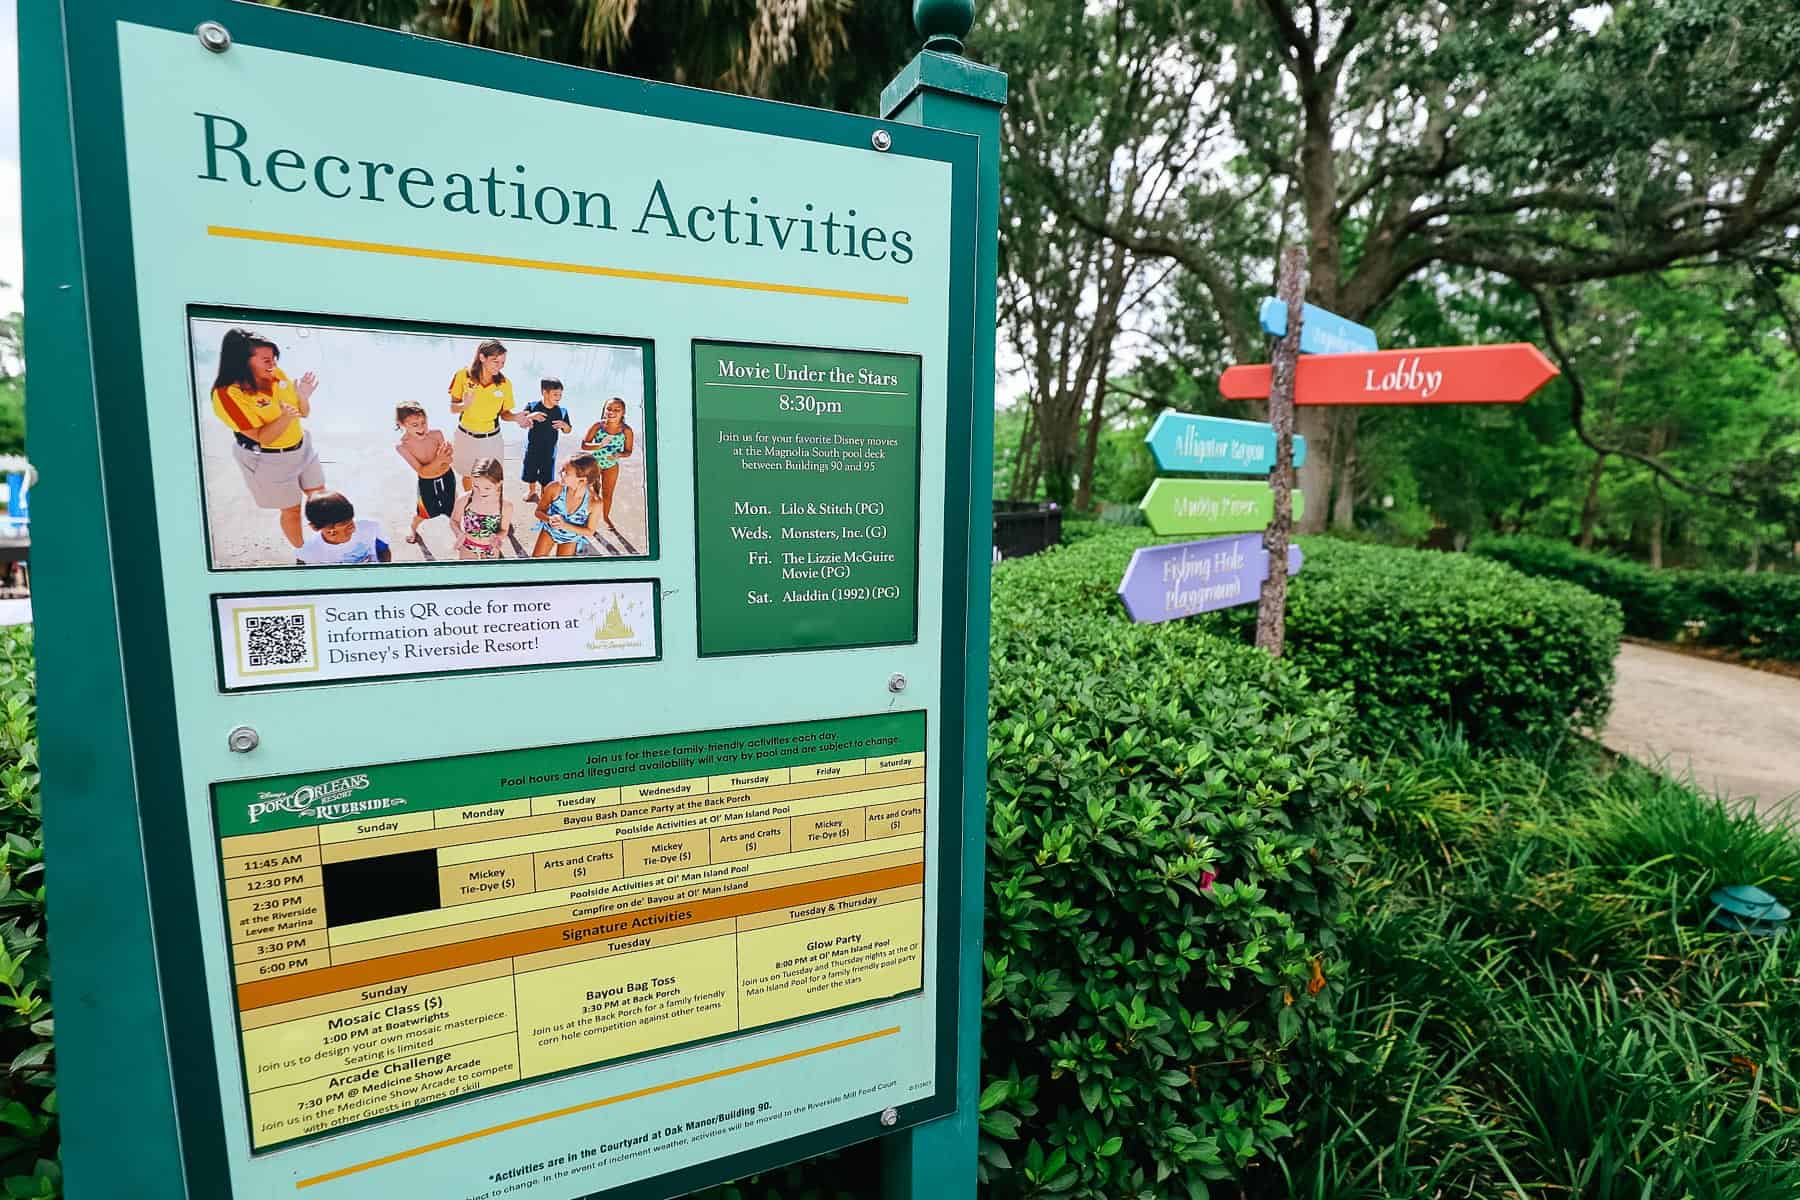 Example of a posted recreation calendar at Disney World 